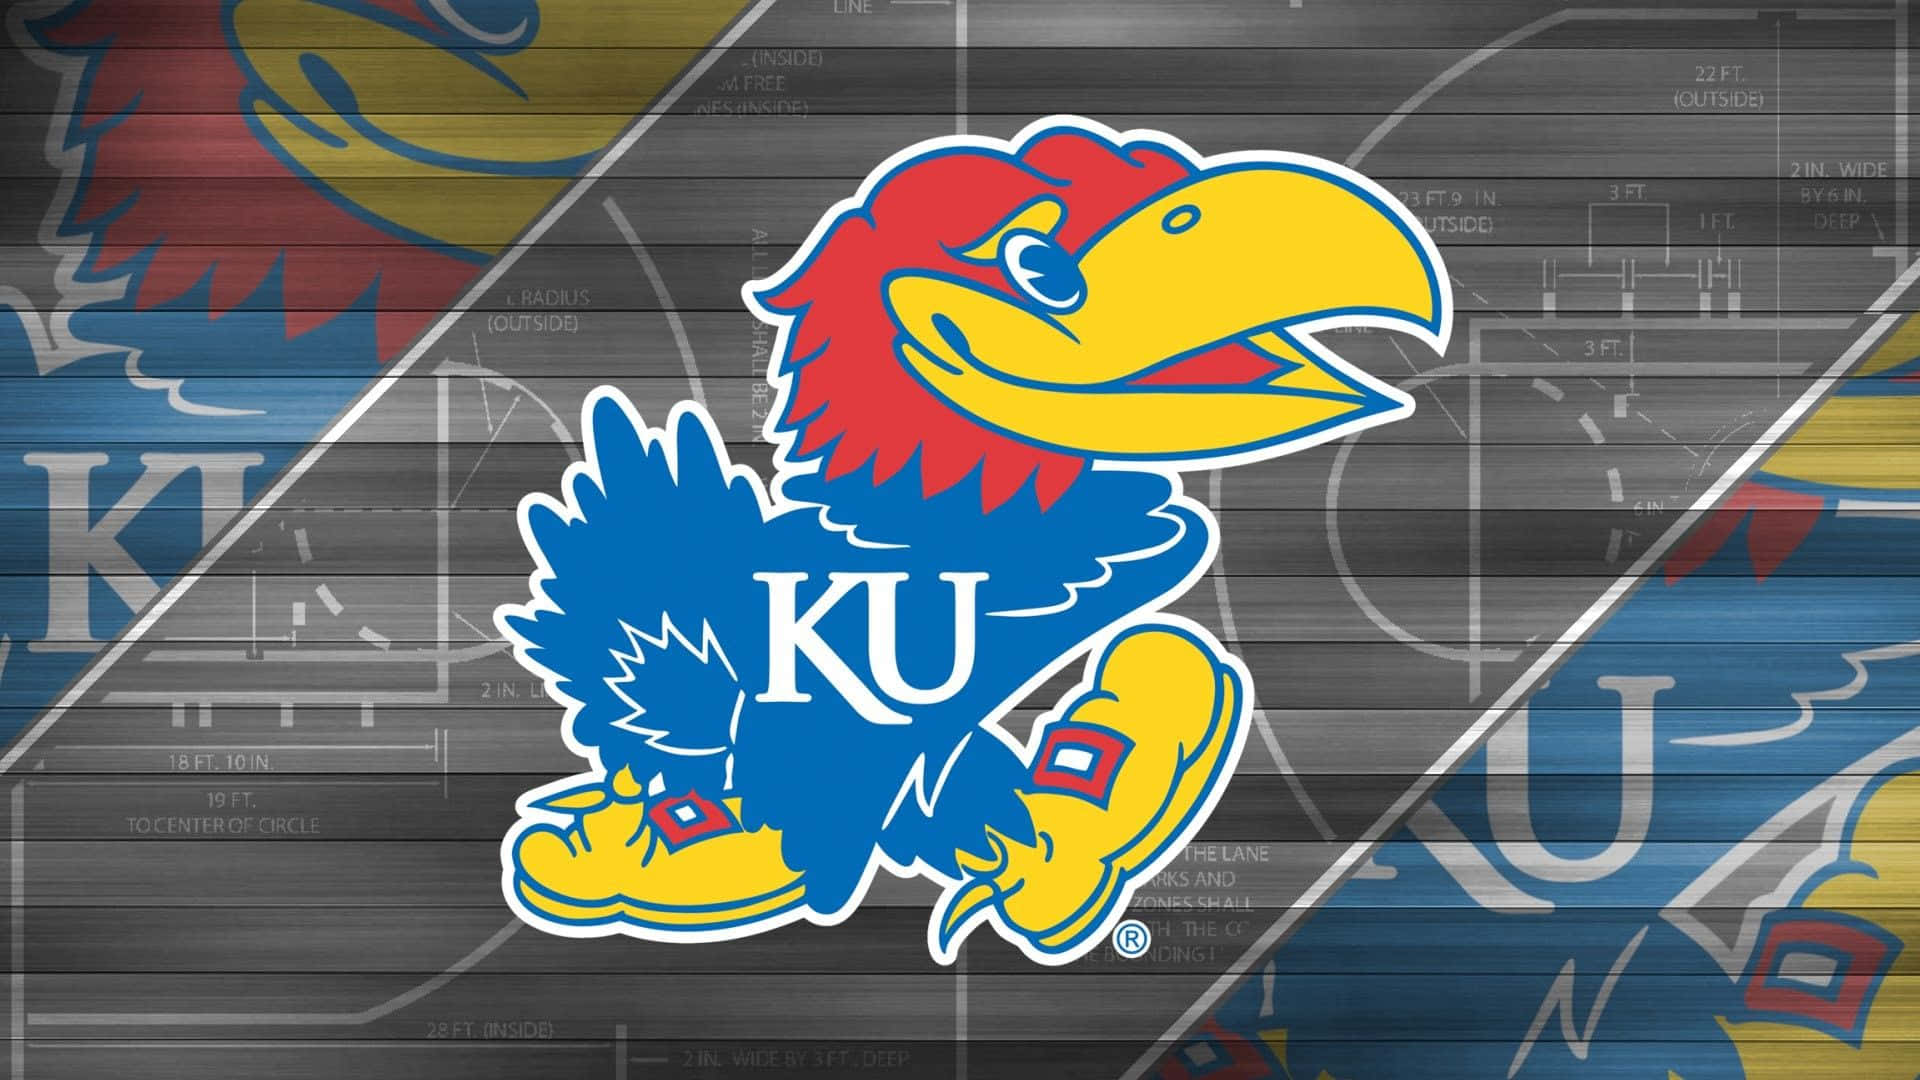 Fans supporting their favorite team, the Kansas Jayhawks, at a basketball game. Wallpaper